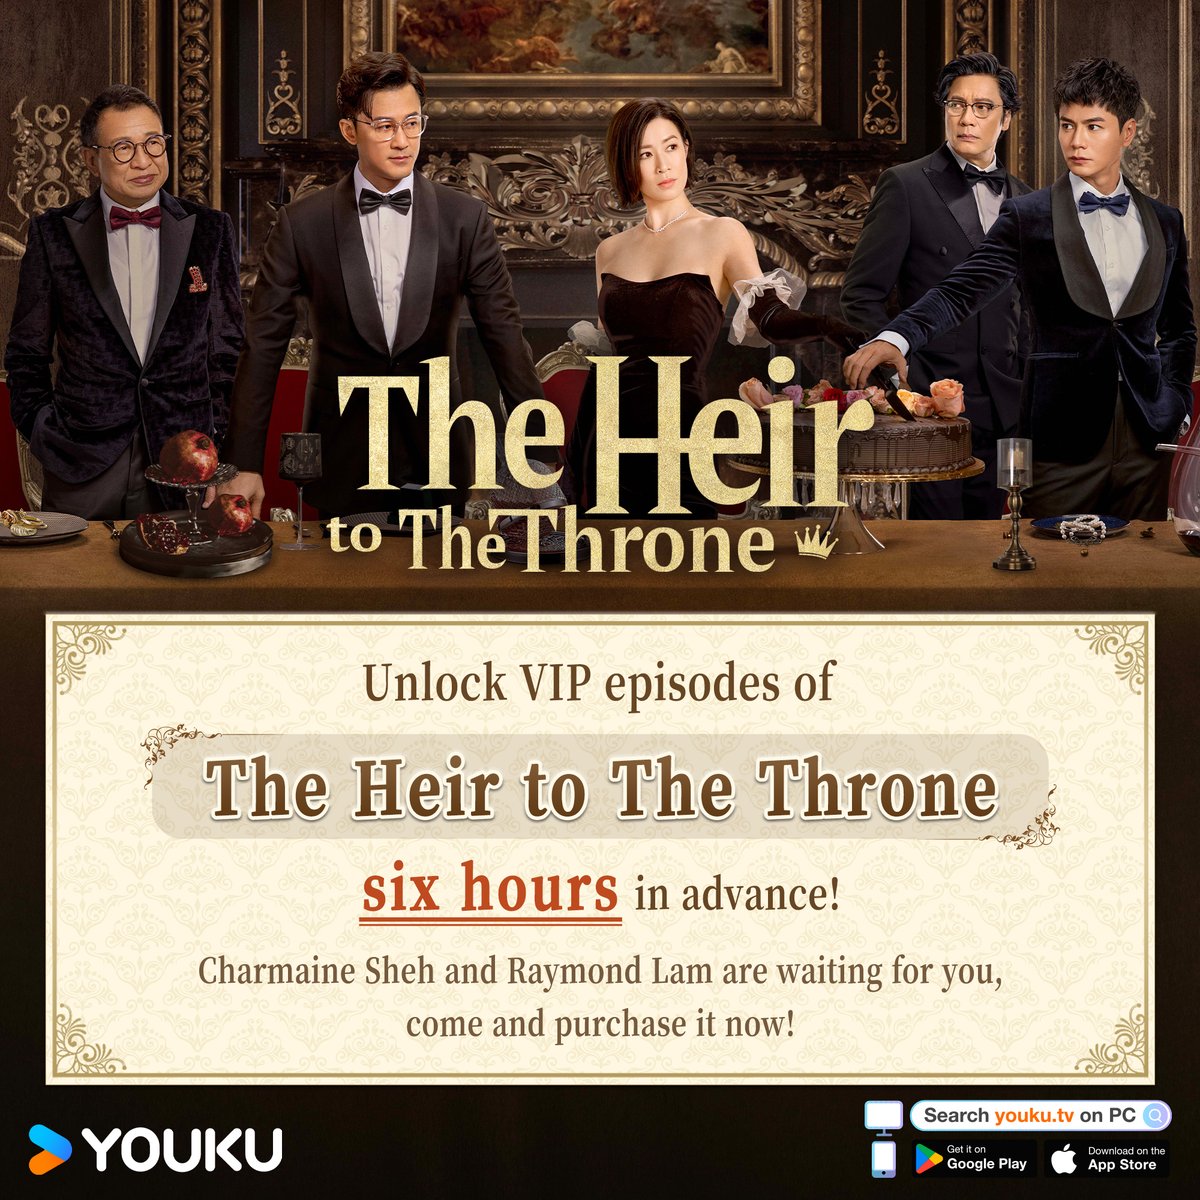 📢Attention! The privilege to watch episodes of #TheHeirToTheThrone ahead of time is now available for purchase. 🛒After purchasing, you can watch the episodes of the day's VIP updates six hours in advance! The battle among the heirs of the wealthy family is about to start! Come…